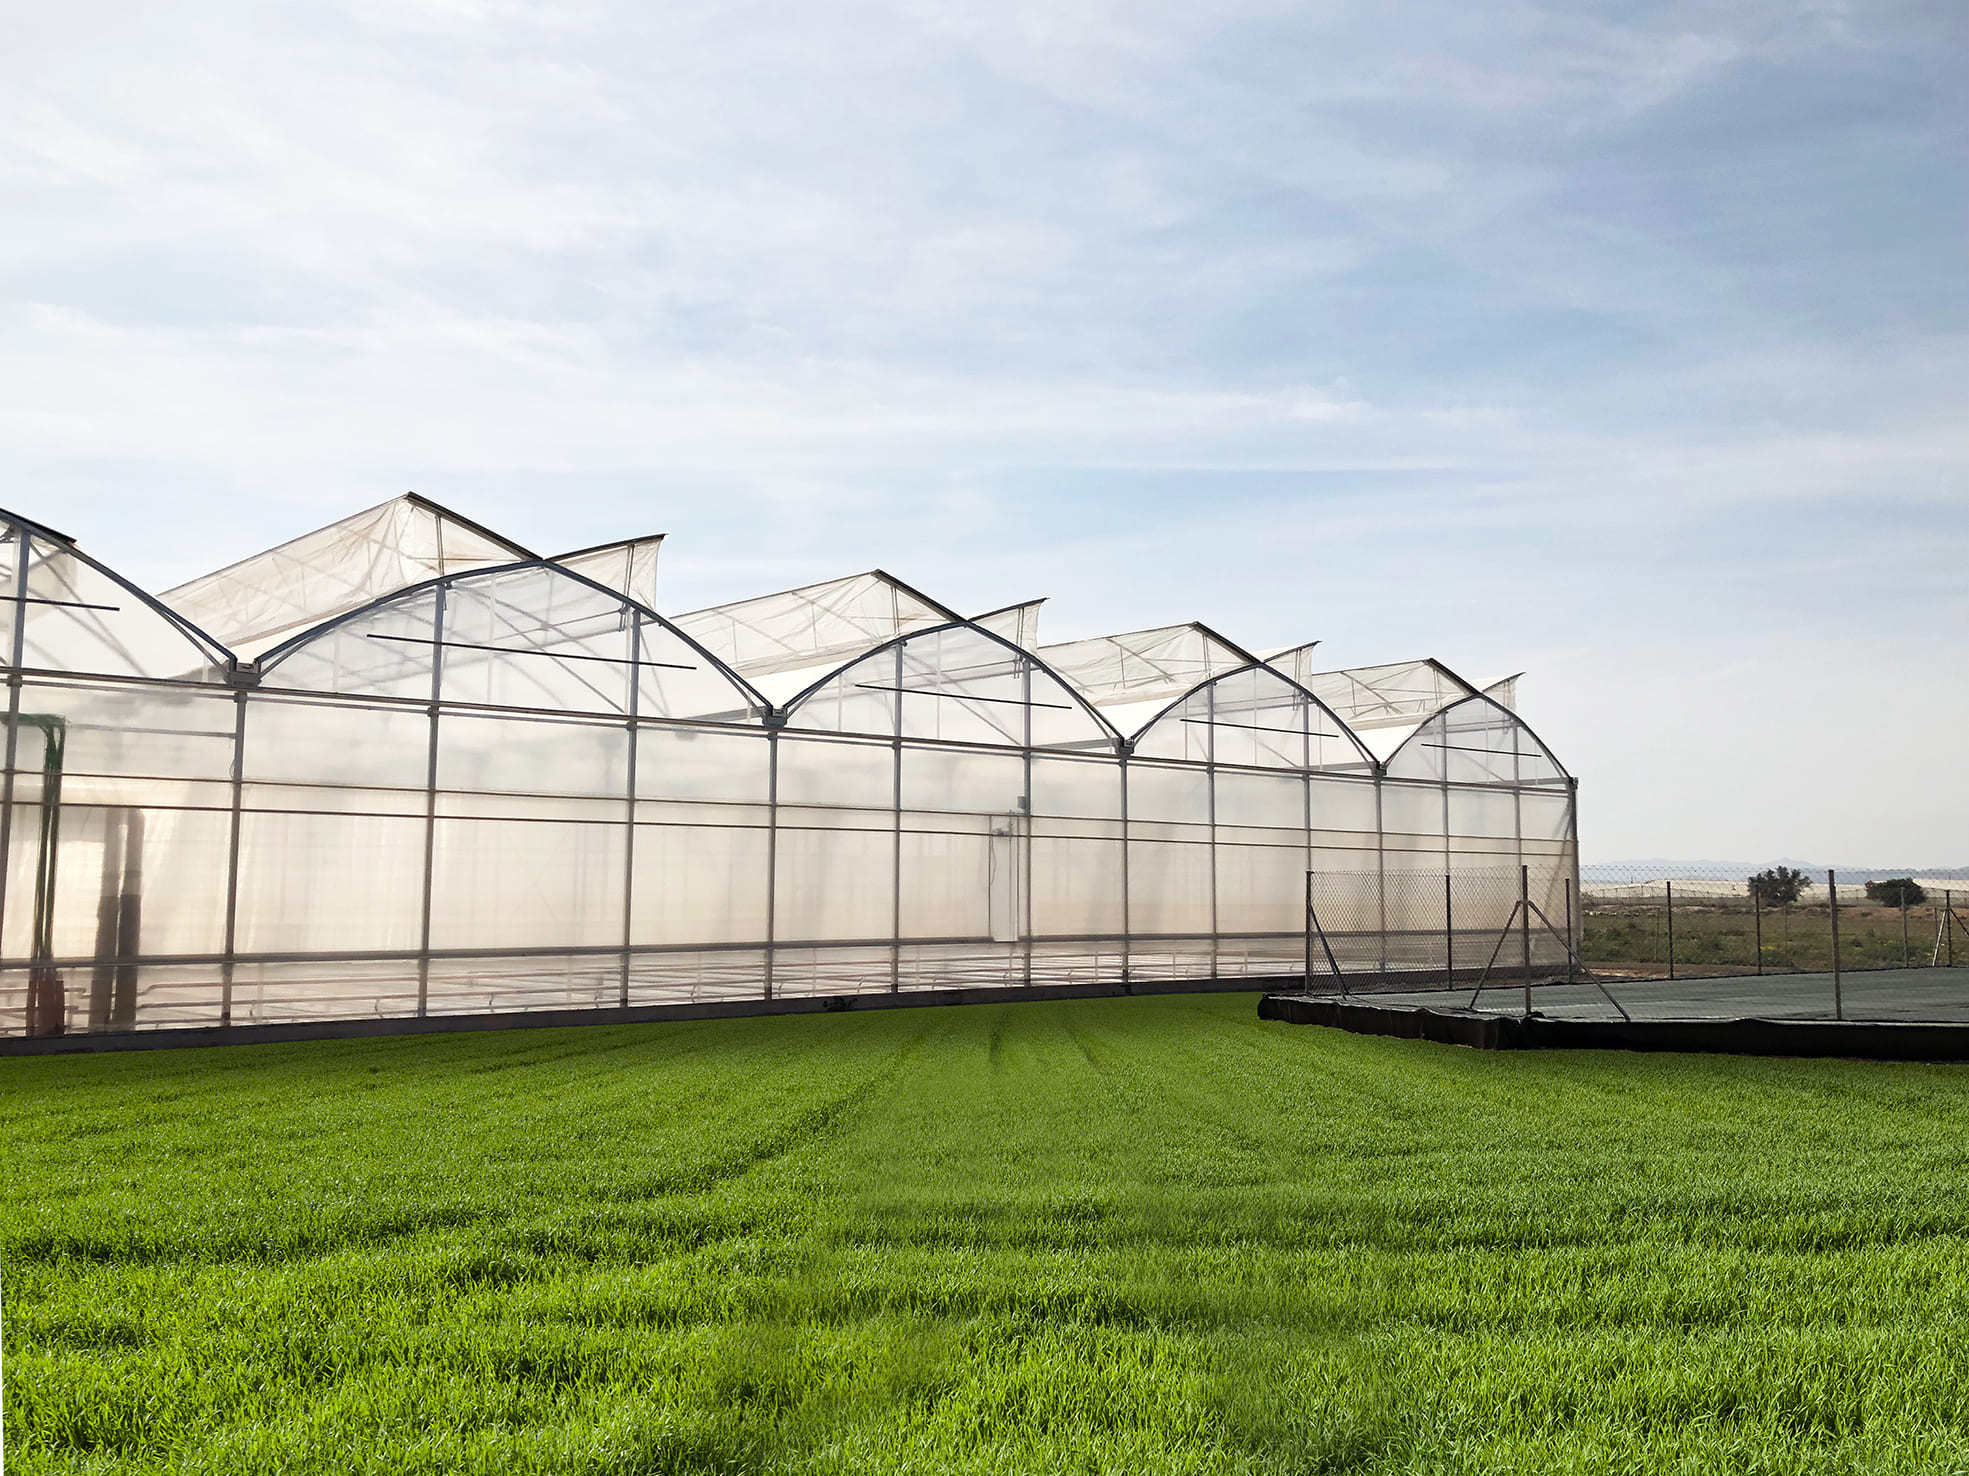 What are the Benefits of Polycarbonate Sheets for Greenhouse Projects?

